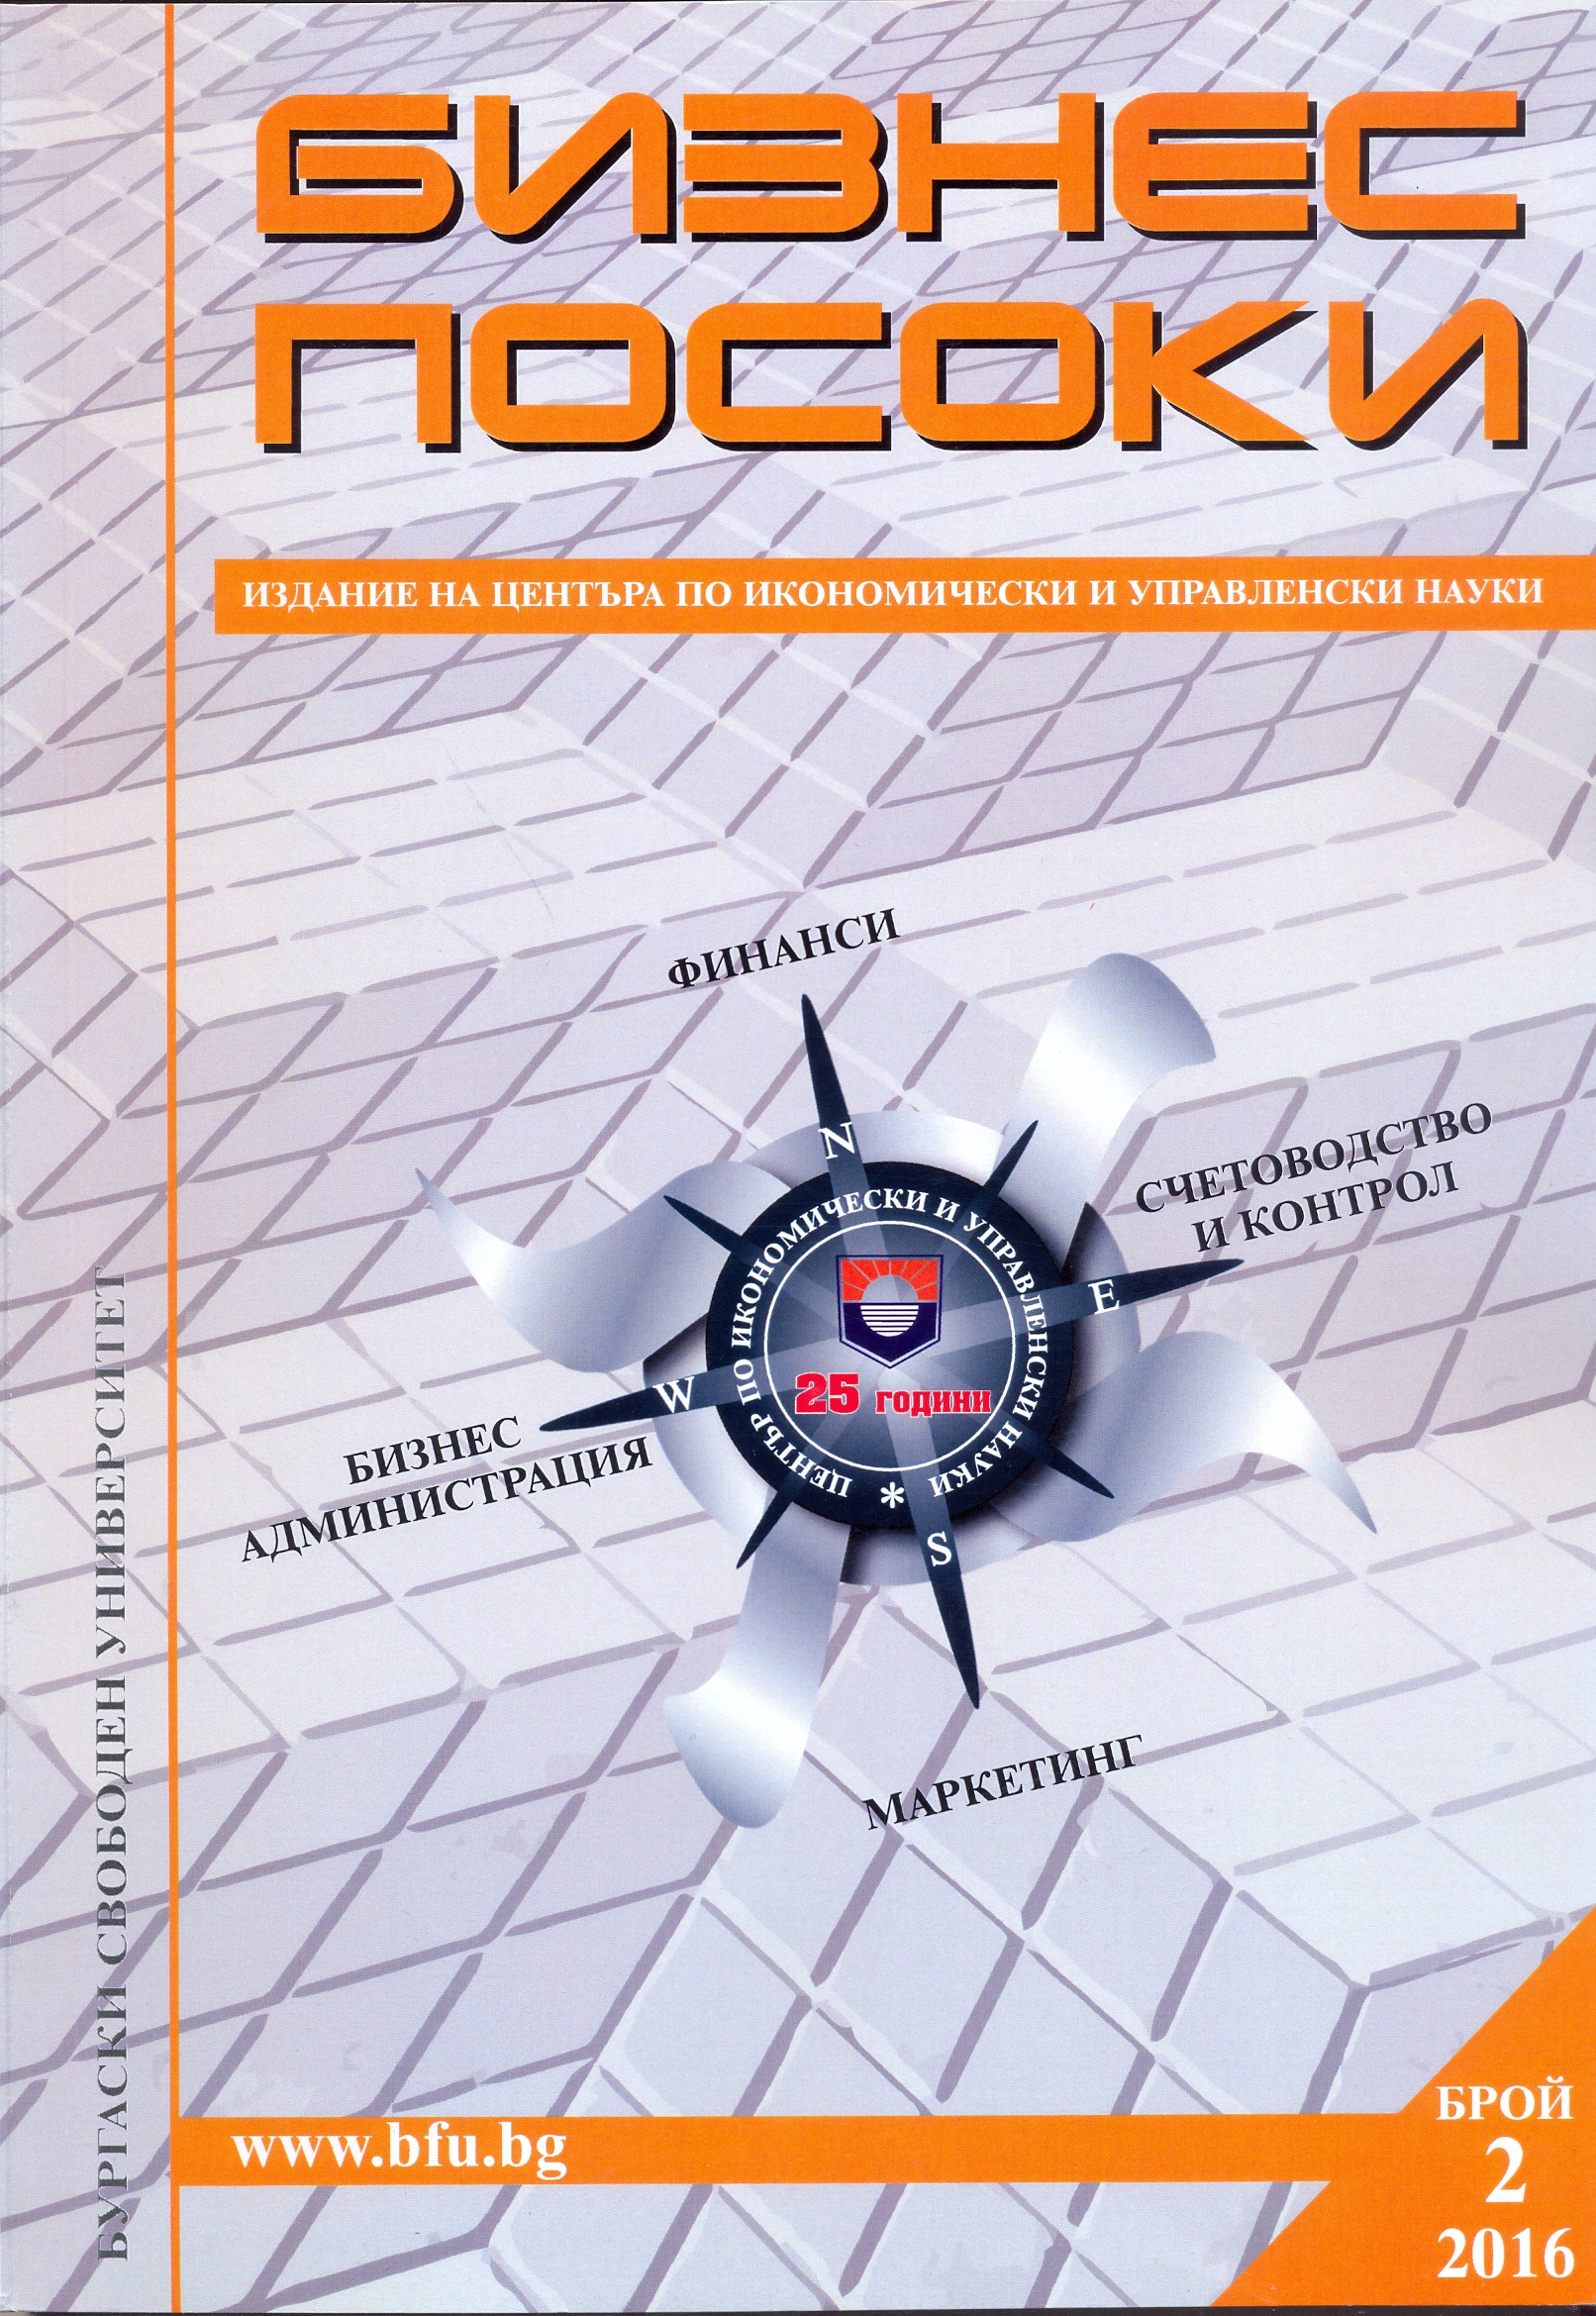 FEATURES OF THE RELATIONSHIP "SYSTEM OF AGRICULTURE - SYSTEM OF FERTILIZATION" AND TRENDS IN THE USE OF FERTILIZERS BY FARMS IN BULGARIA BETWEEN 2007-2014 Cover Image